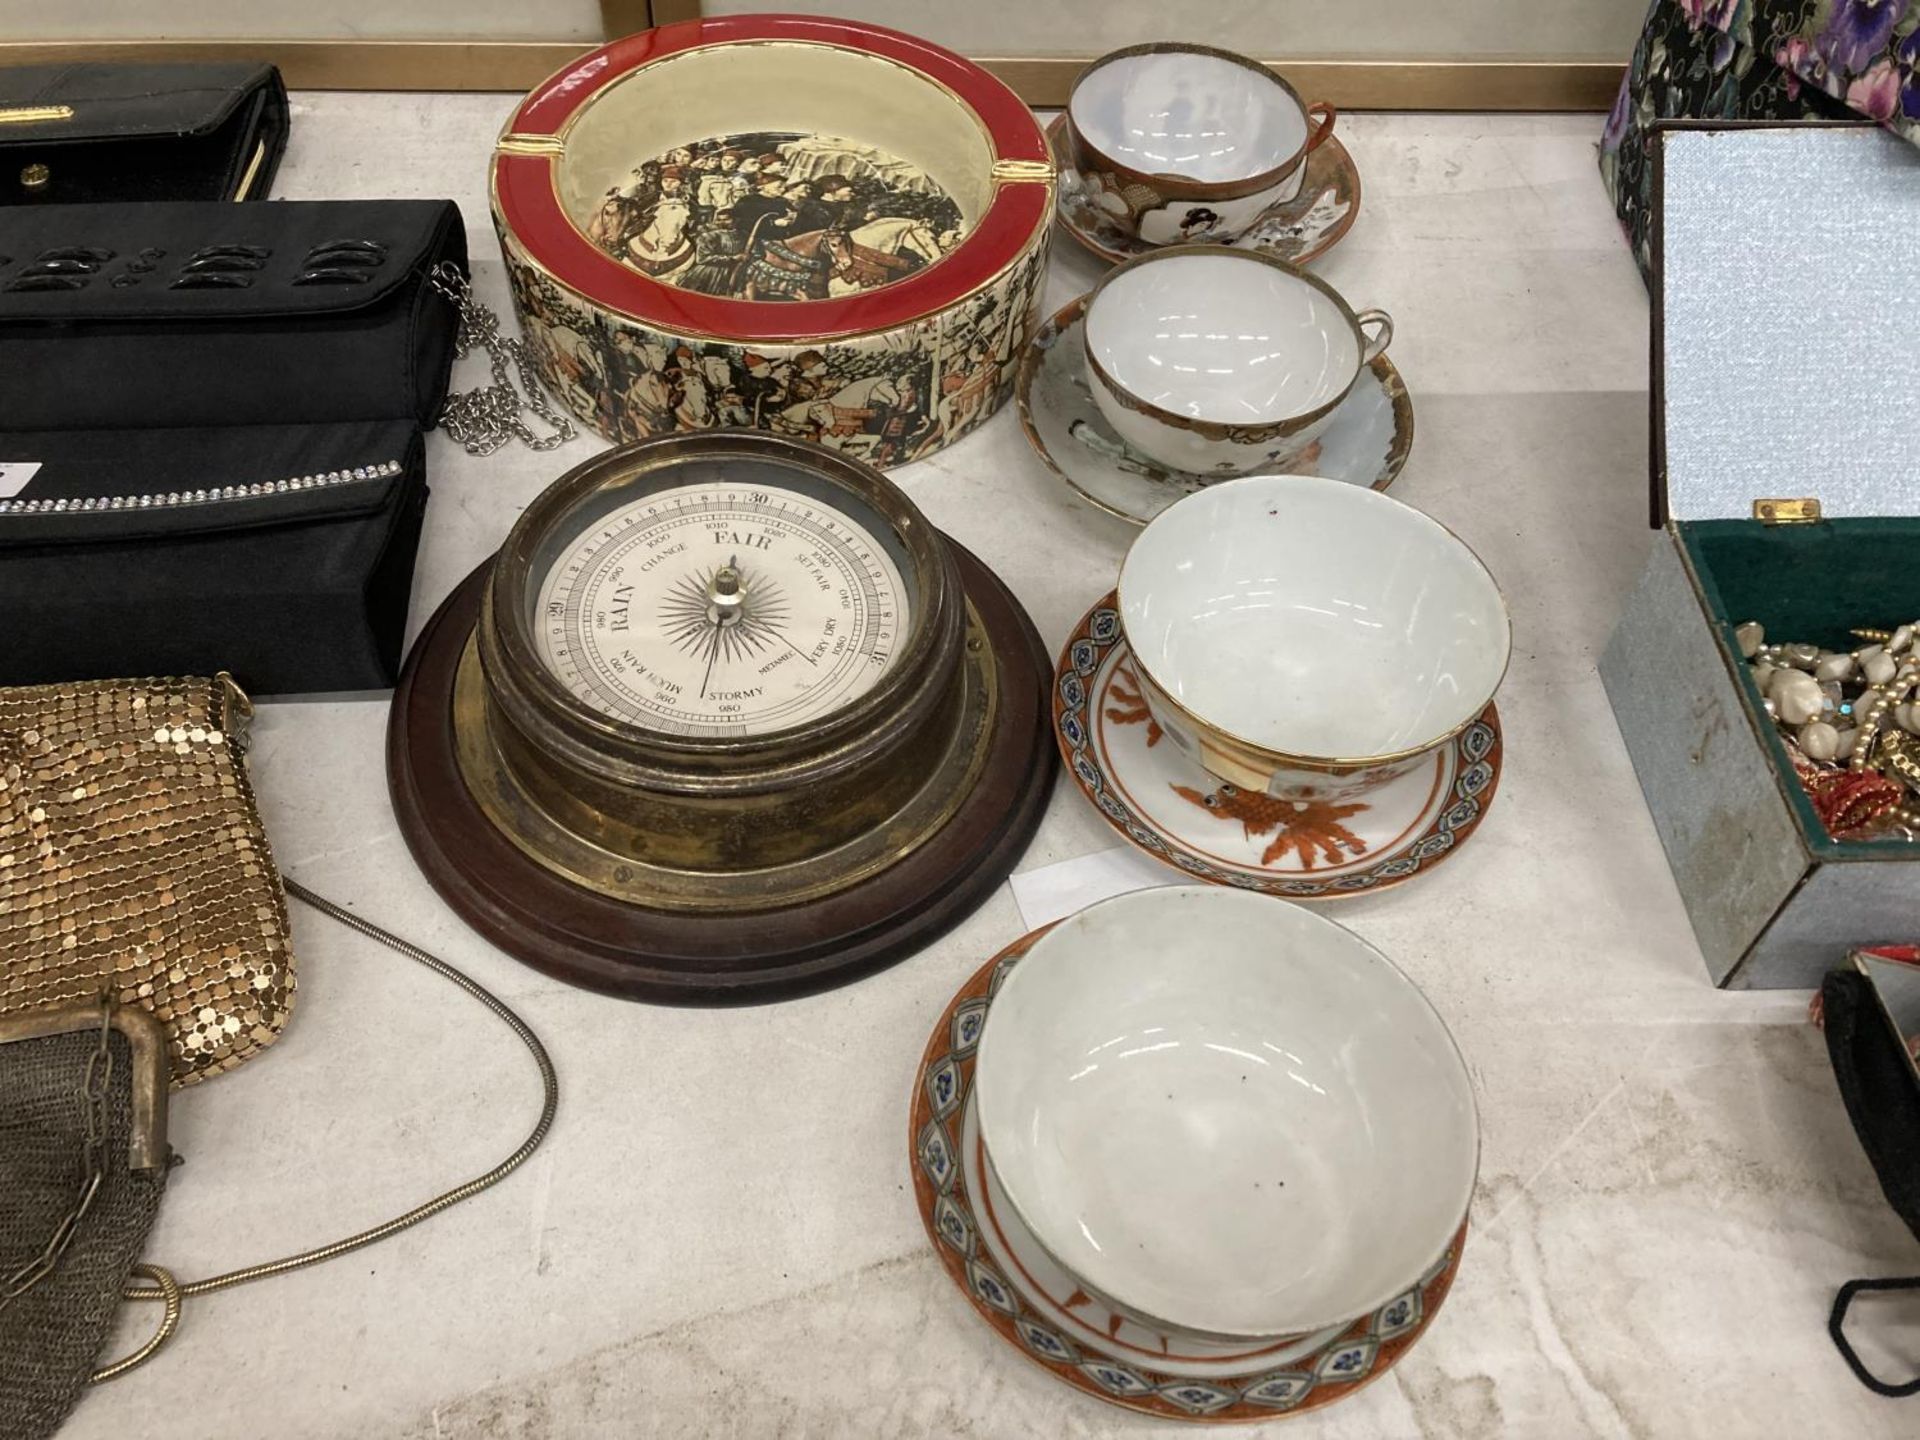 FOUR ORIENTAL CUPS AND SAUCERS, A LARGE ITALIAN CERAMIC BOWL WITH VINTAGE DECORATION, PLUS A ROUND